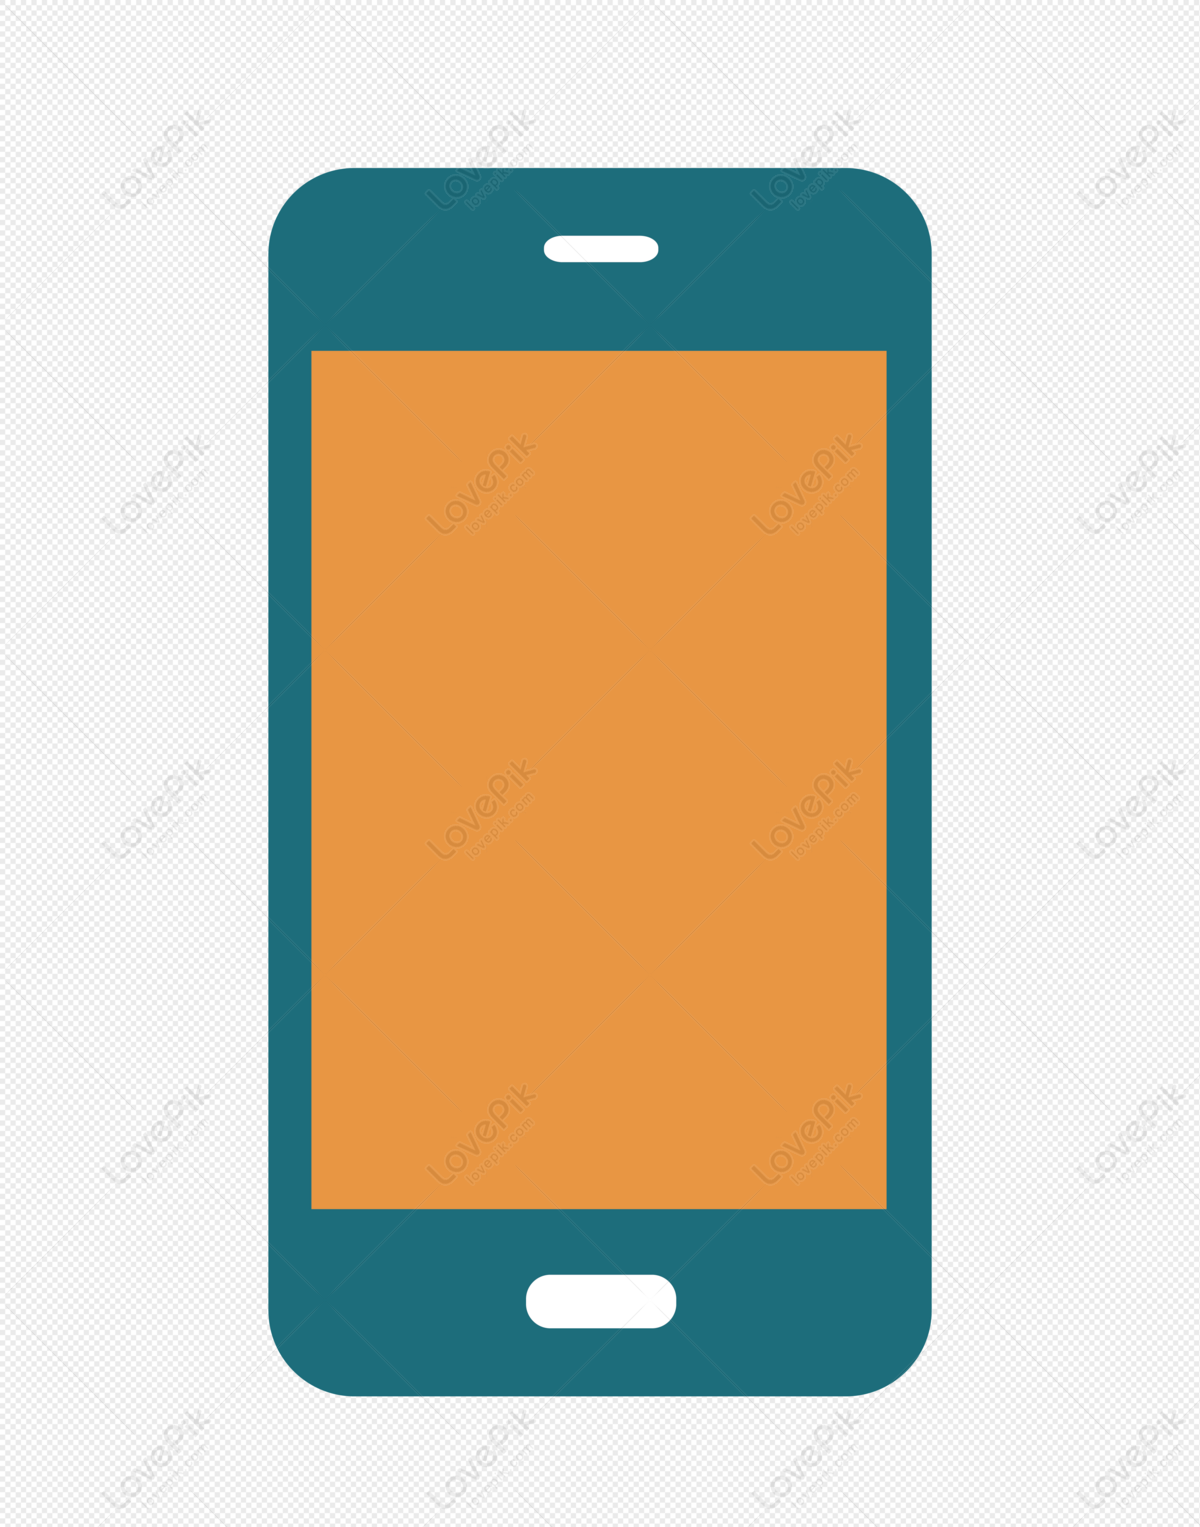 Mobile Phone PNG Transparent Background And Clipart Image For Free Download  - Lovepik | 400184850